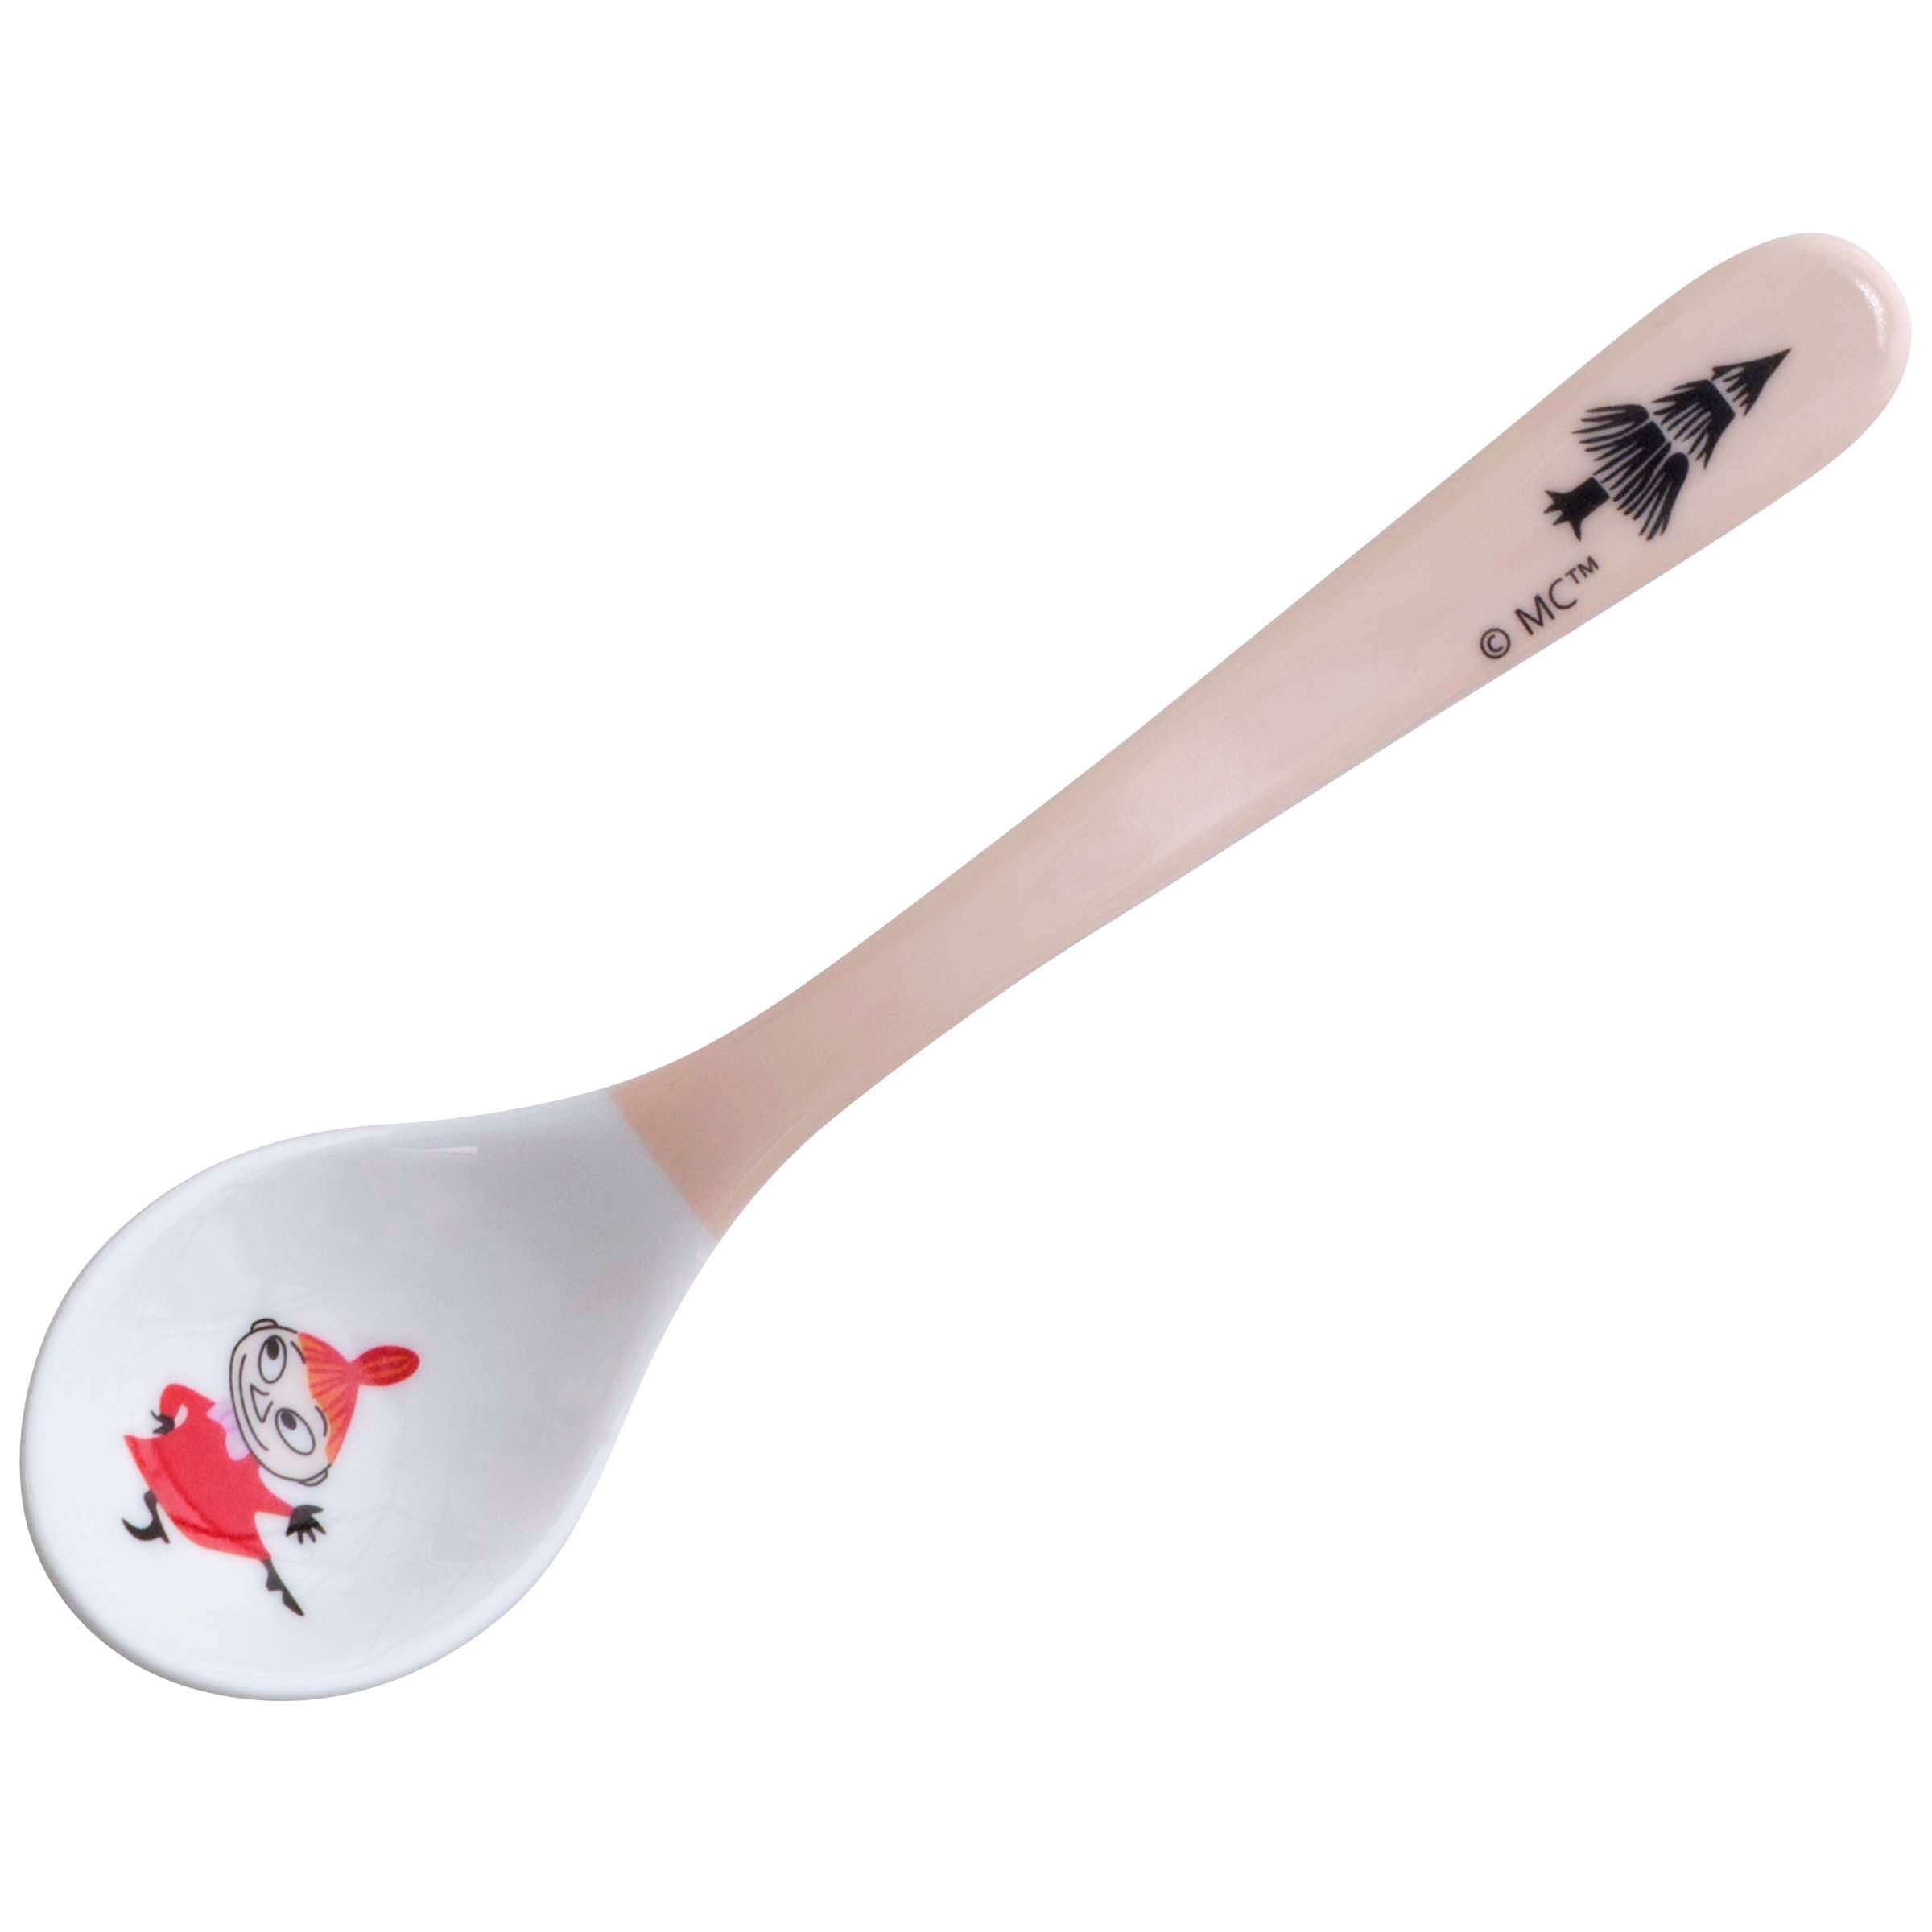 Moomin spoon 1-pack "Forest & Lake" pink